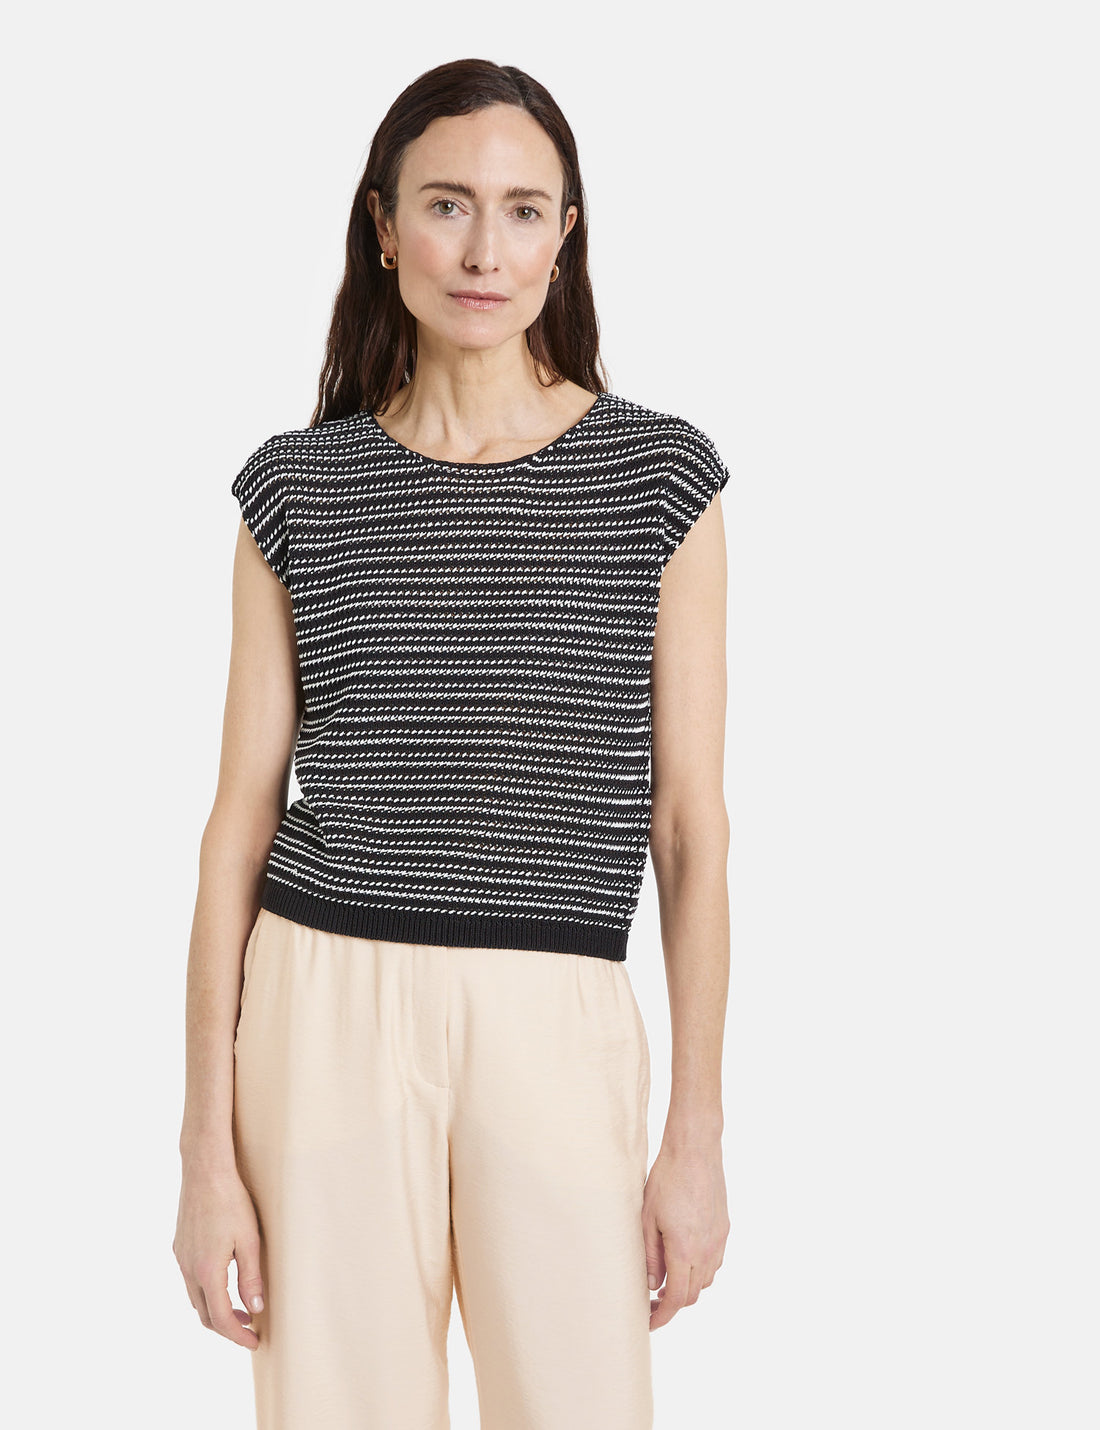 Striped Sleeveless Jumper In A Textured Knit_371021-35737_1090_01